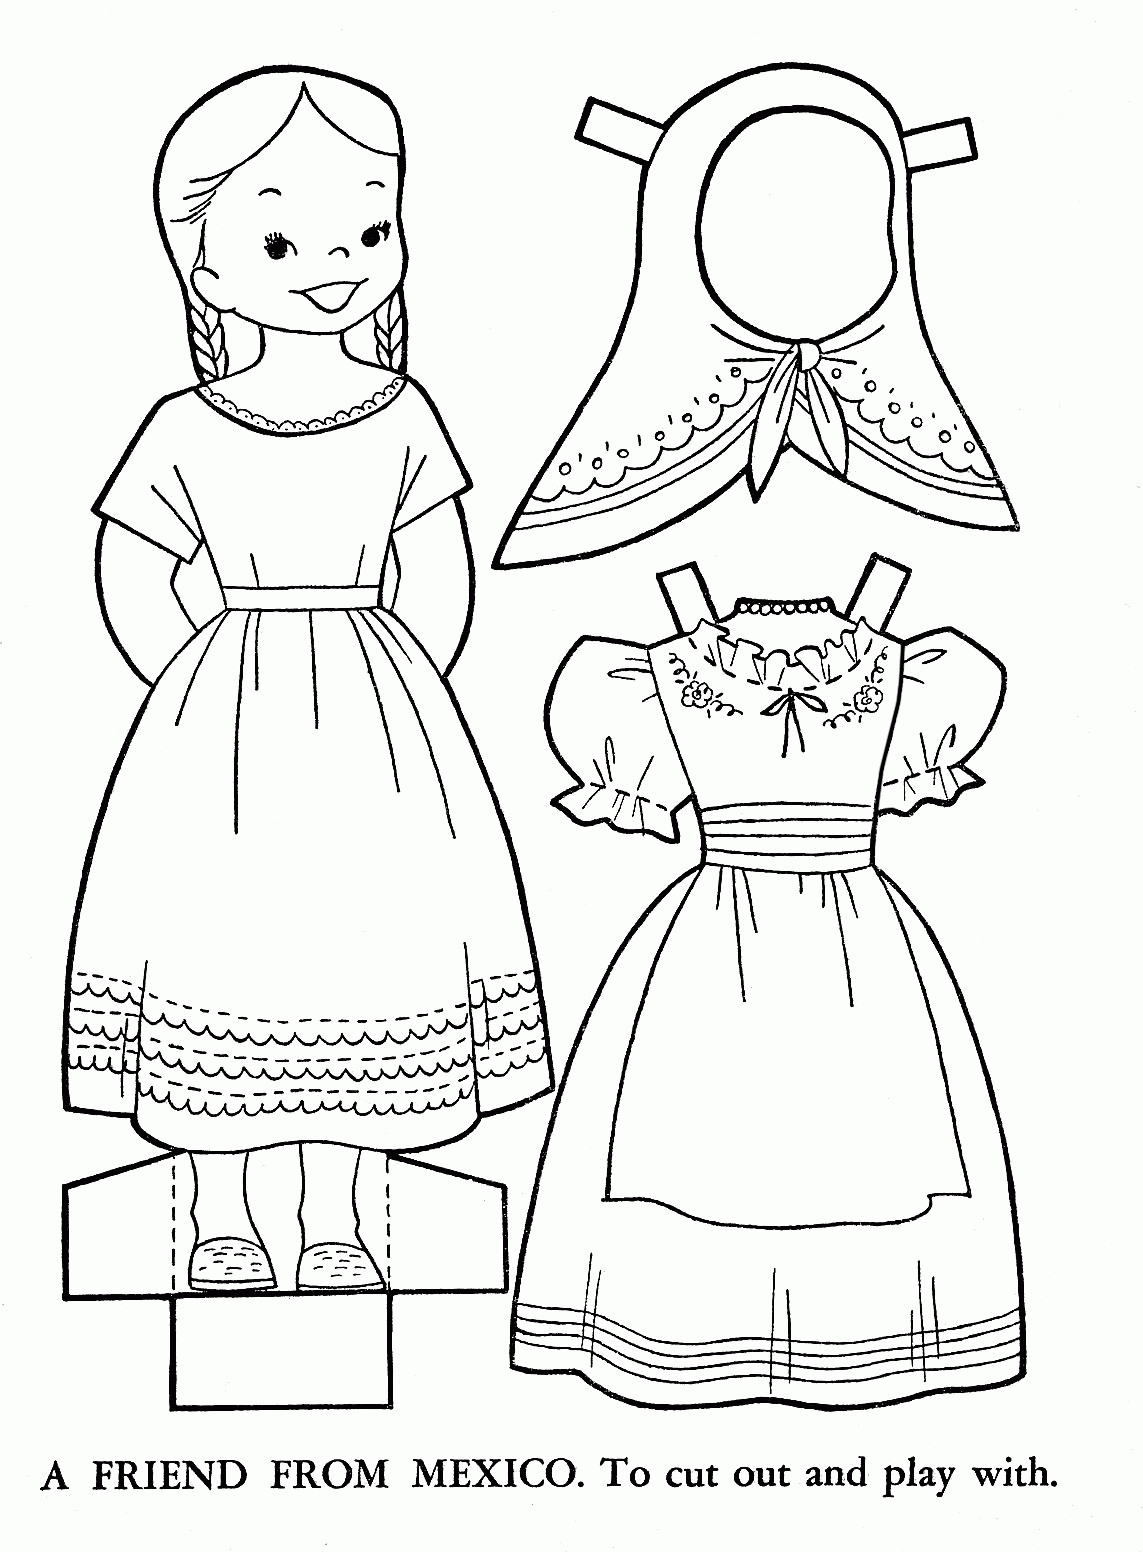 Preschool Christmas In Mexico Coloring Page Free Printable ...